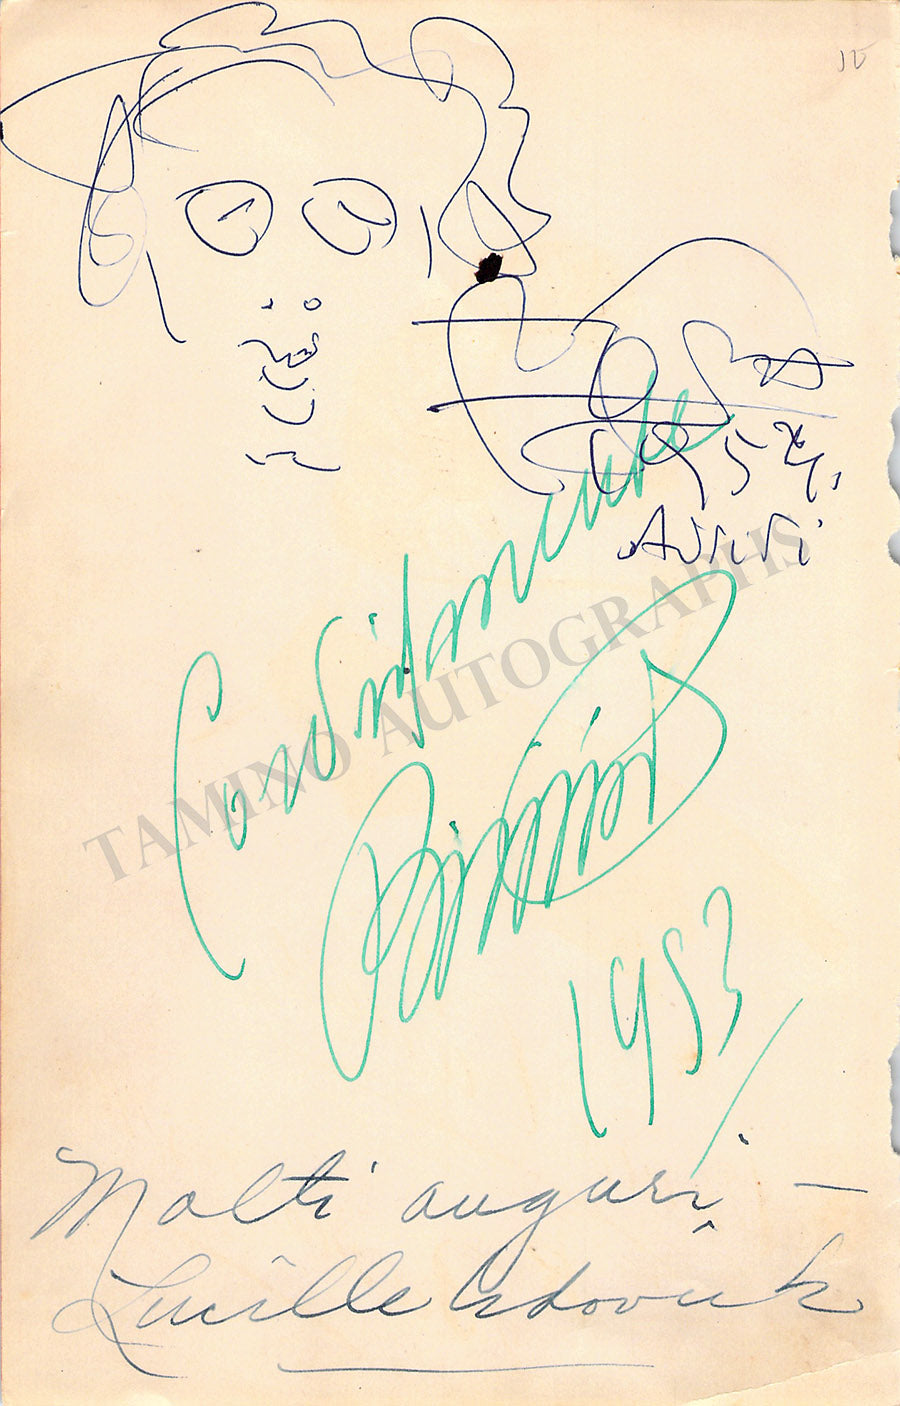 Opera Singers - Signatures Lot 1950s and on (Lot 1)